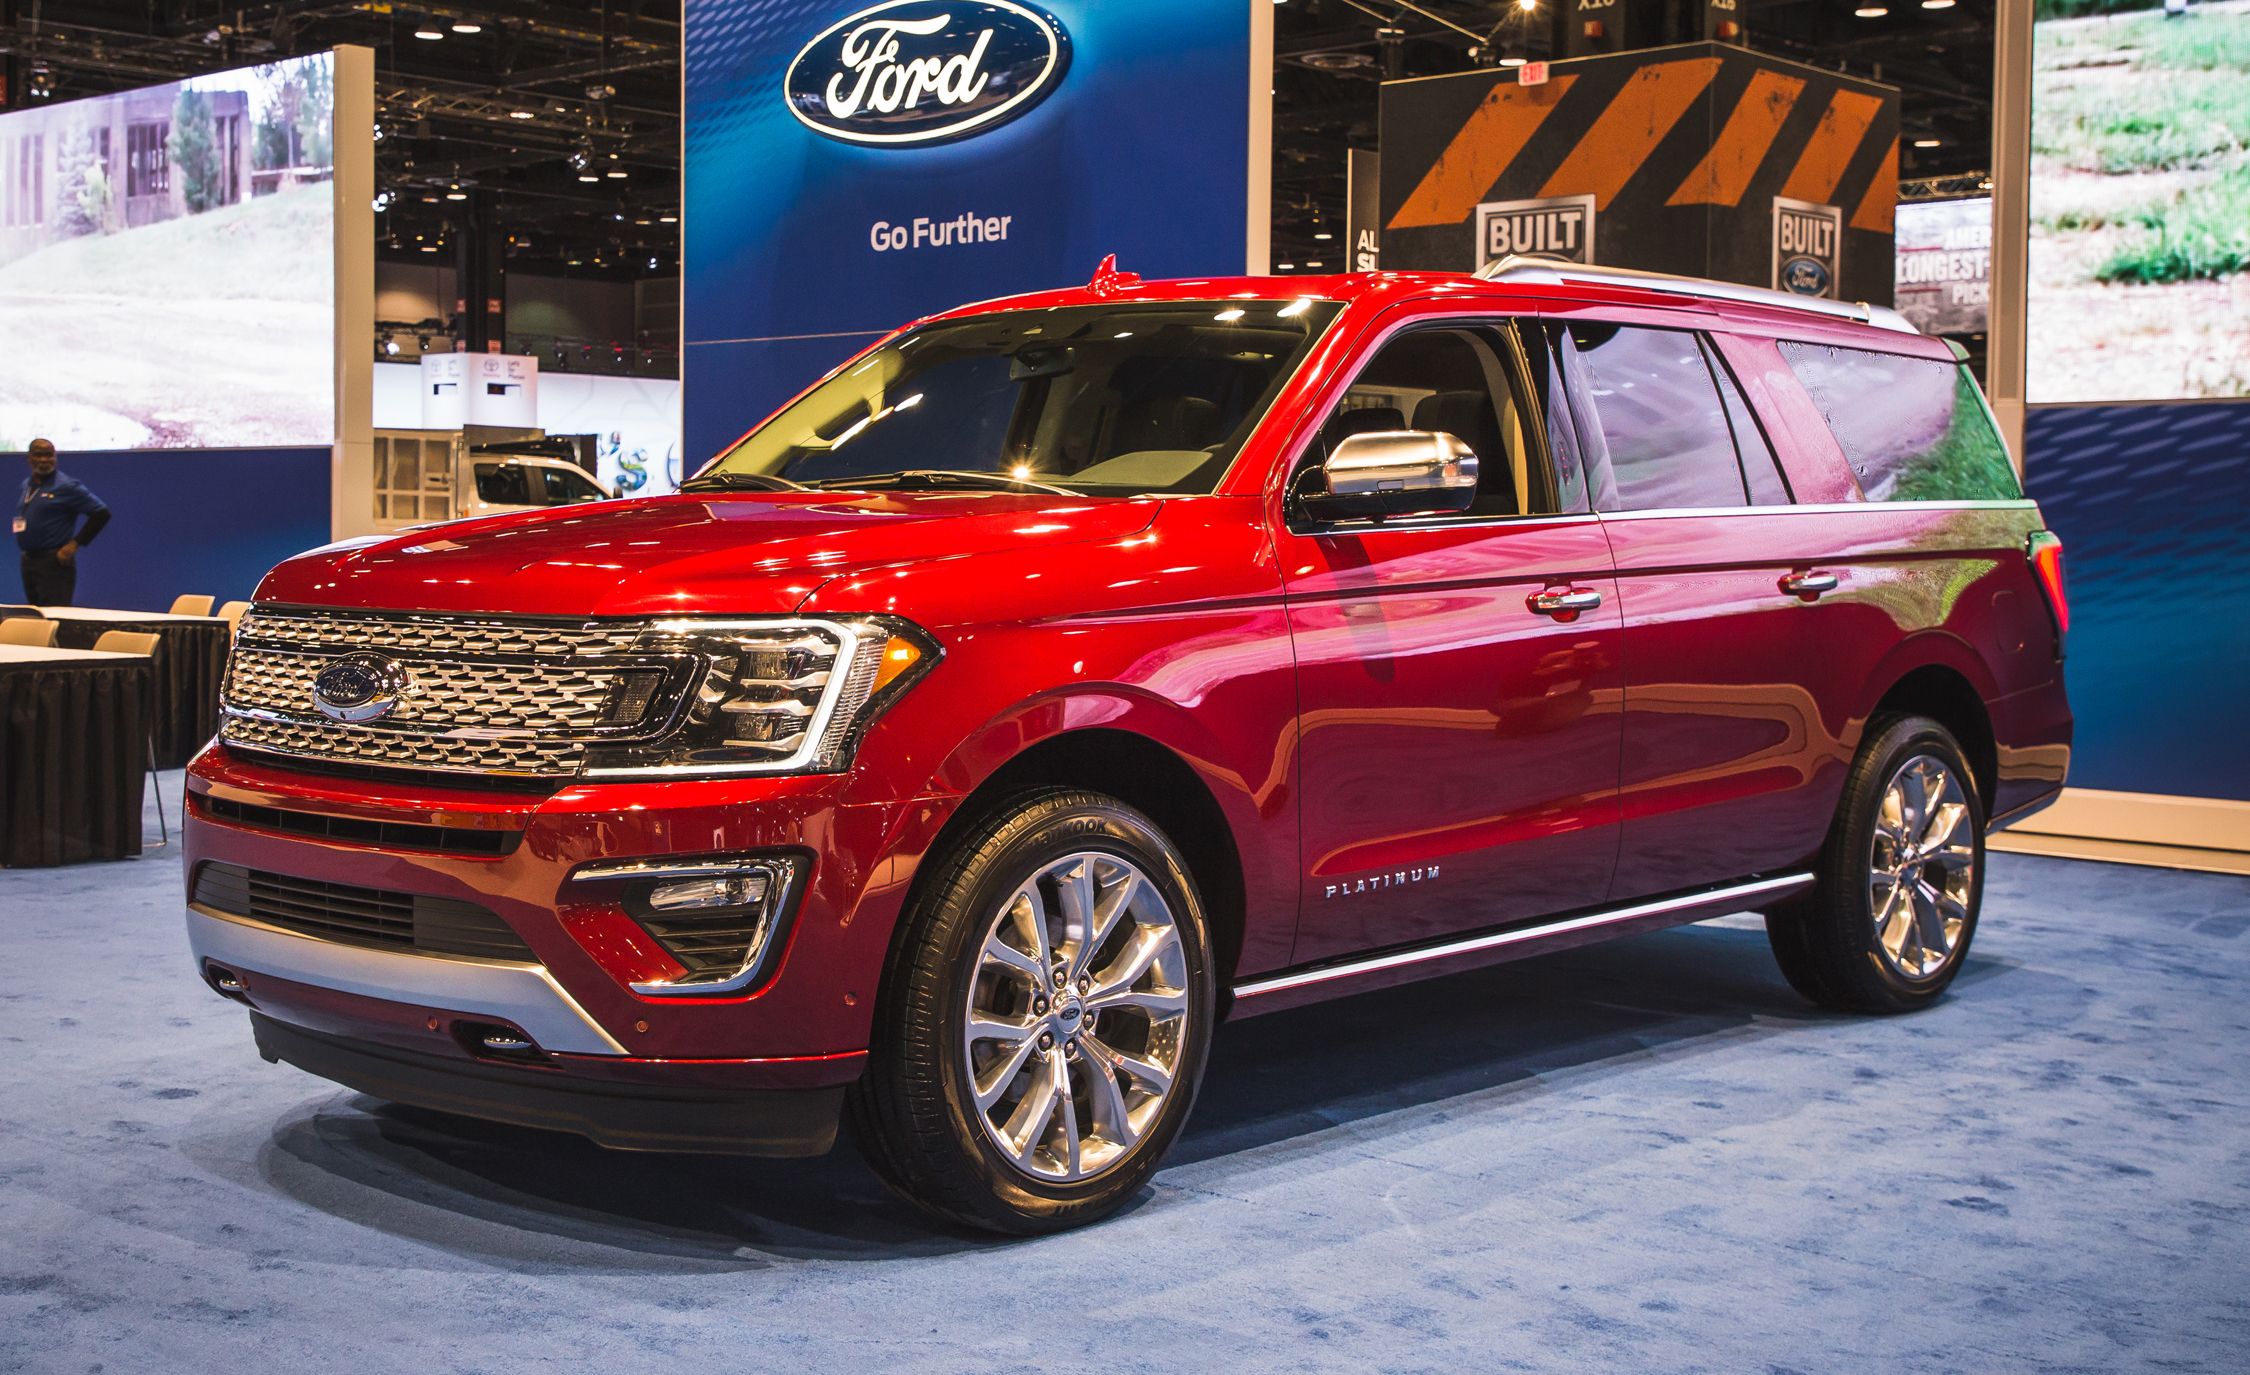 2018 Ford Expedition Photos and Info News Car and Driver